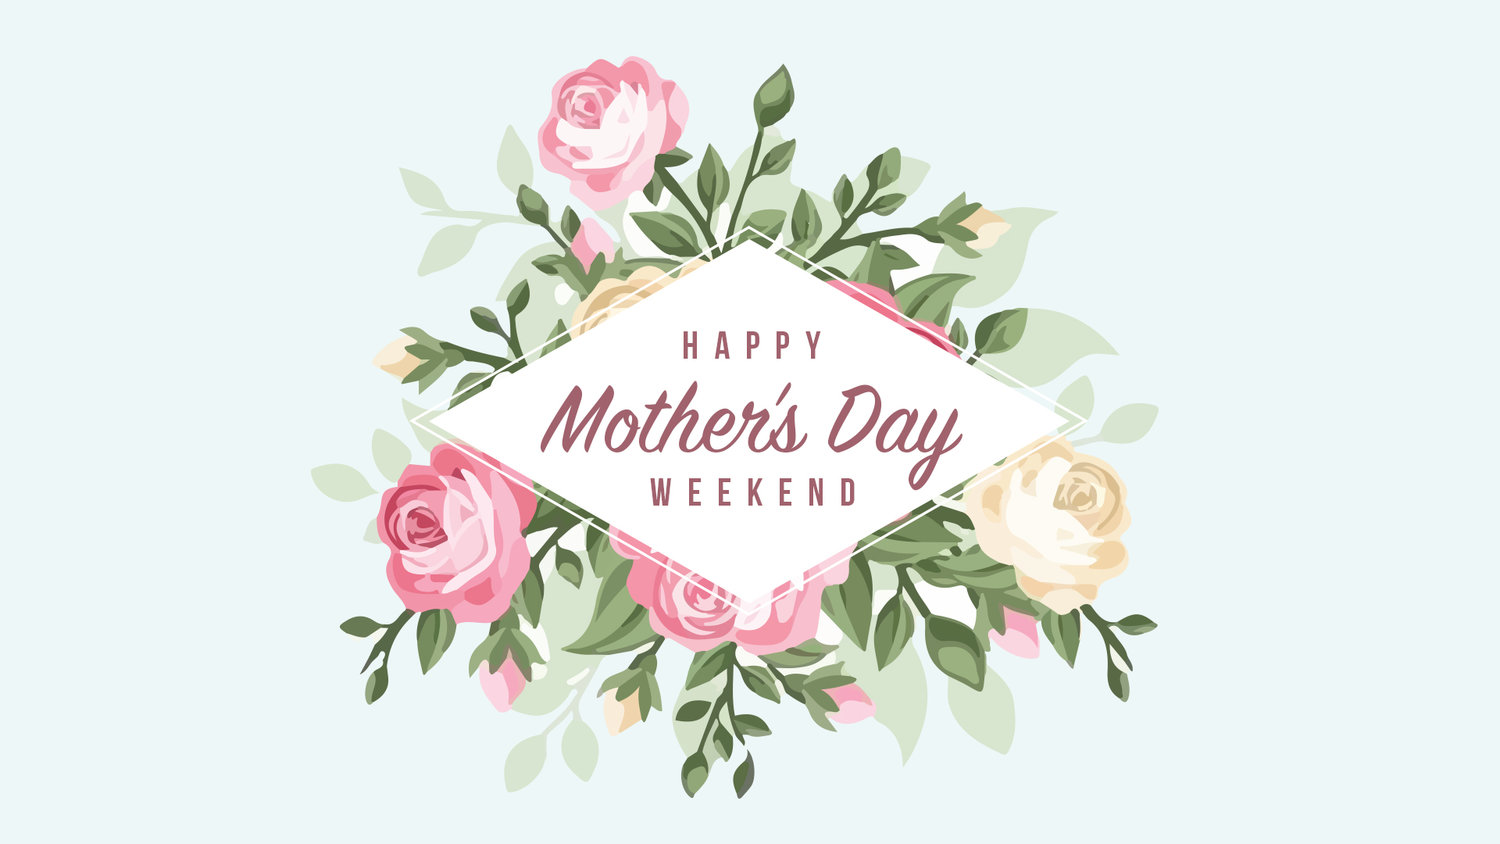 Mother's Day Weekend Message